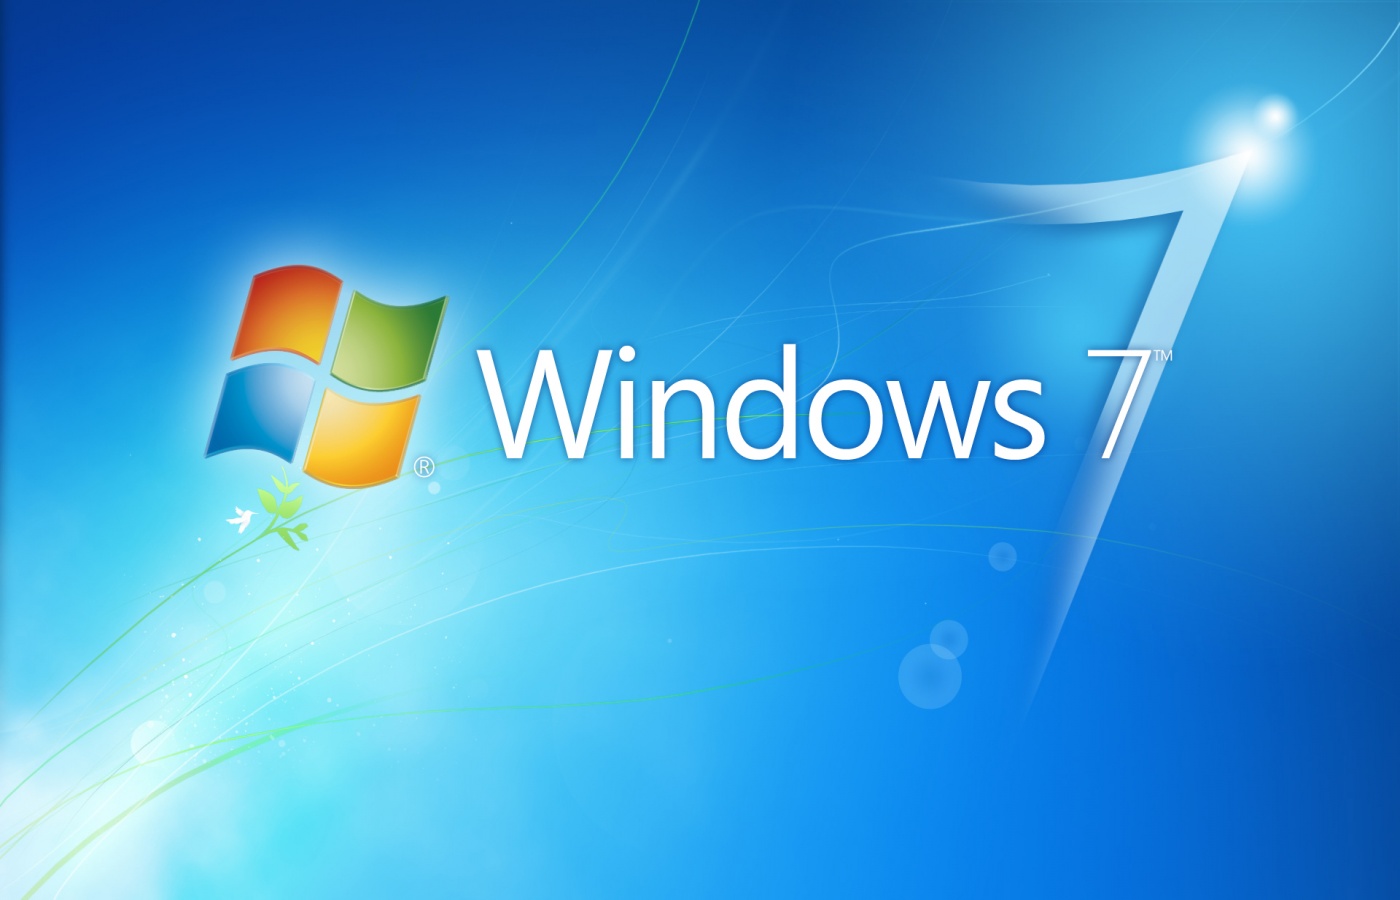 Windows 7 Logo Wallpaper PC Android iPhone and iPad Wallpapers